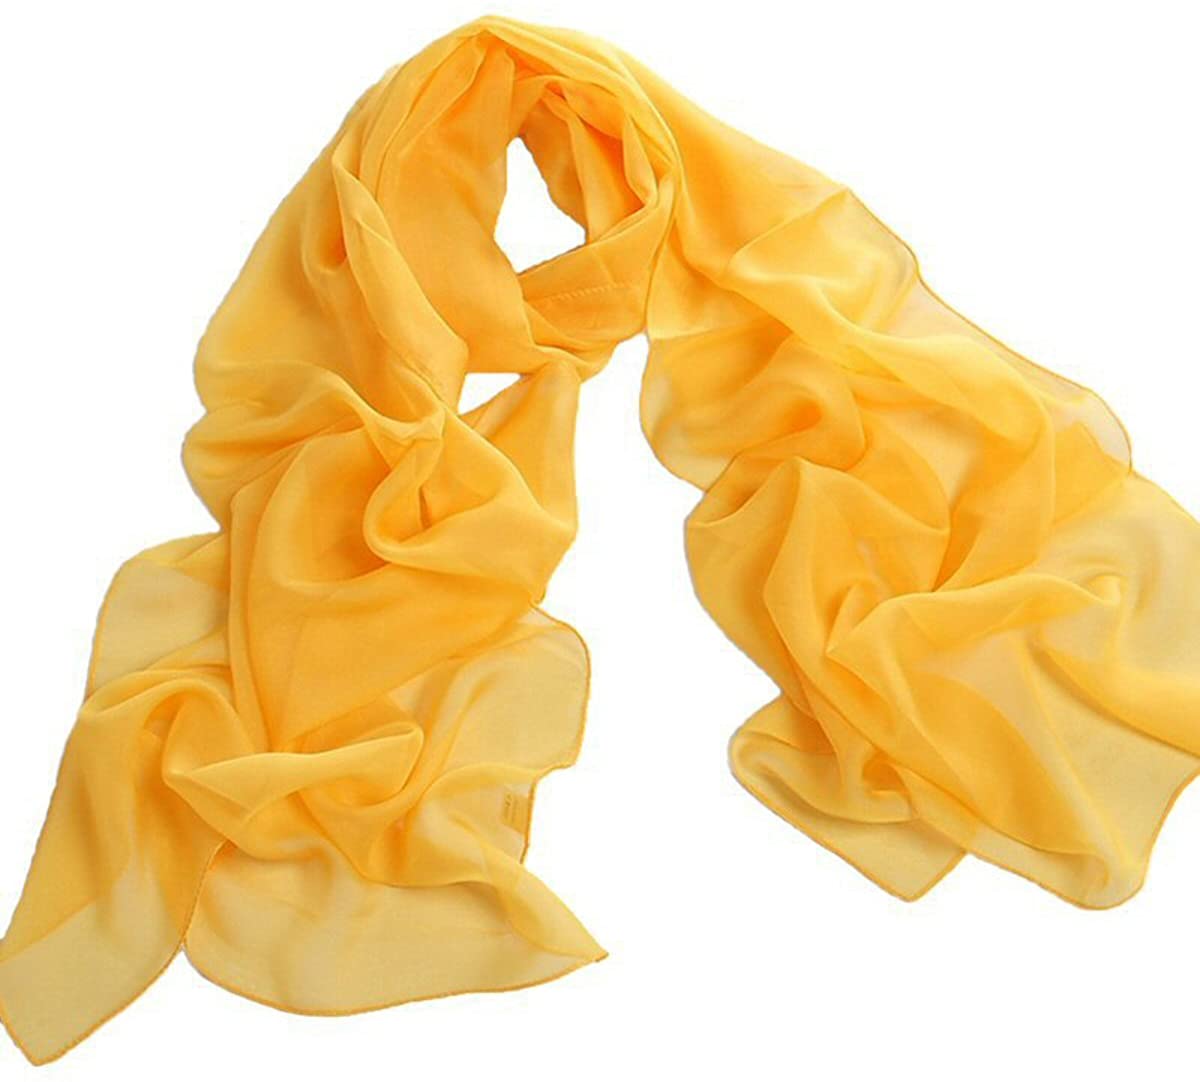 Tapp Collections™ Fashionable Soft Chiffon Scarf